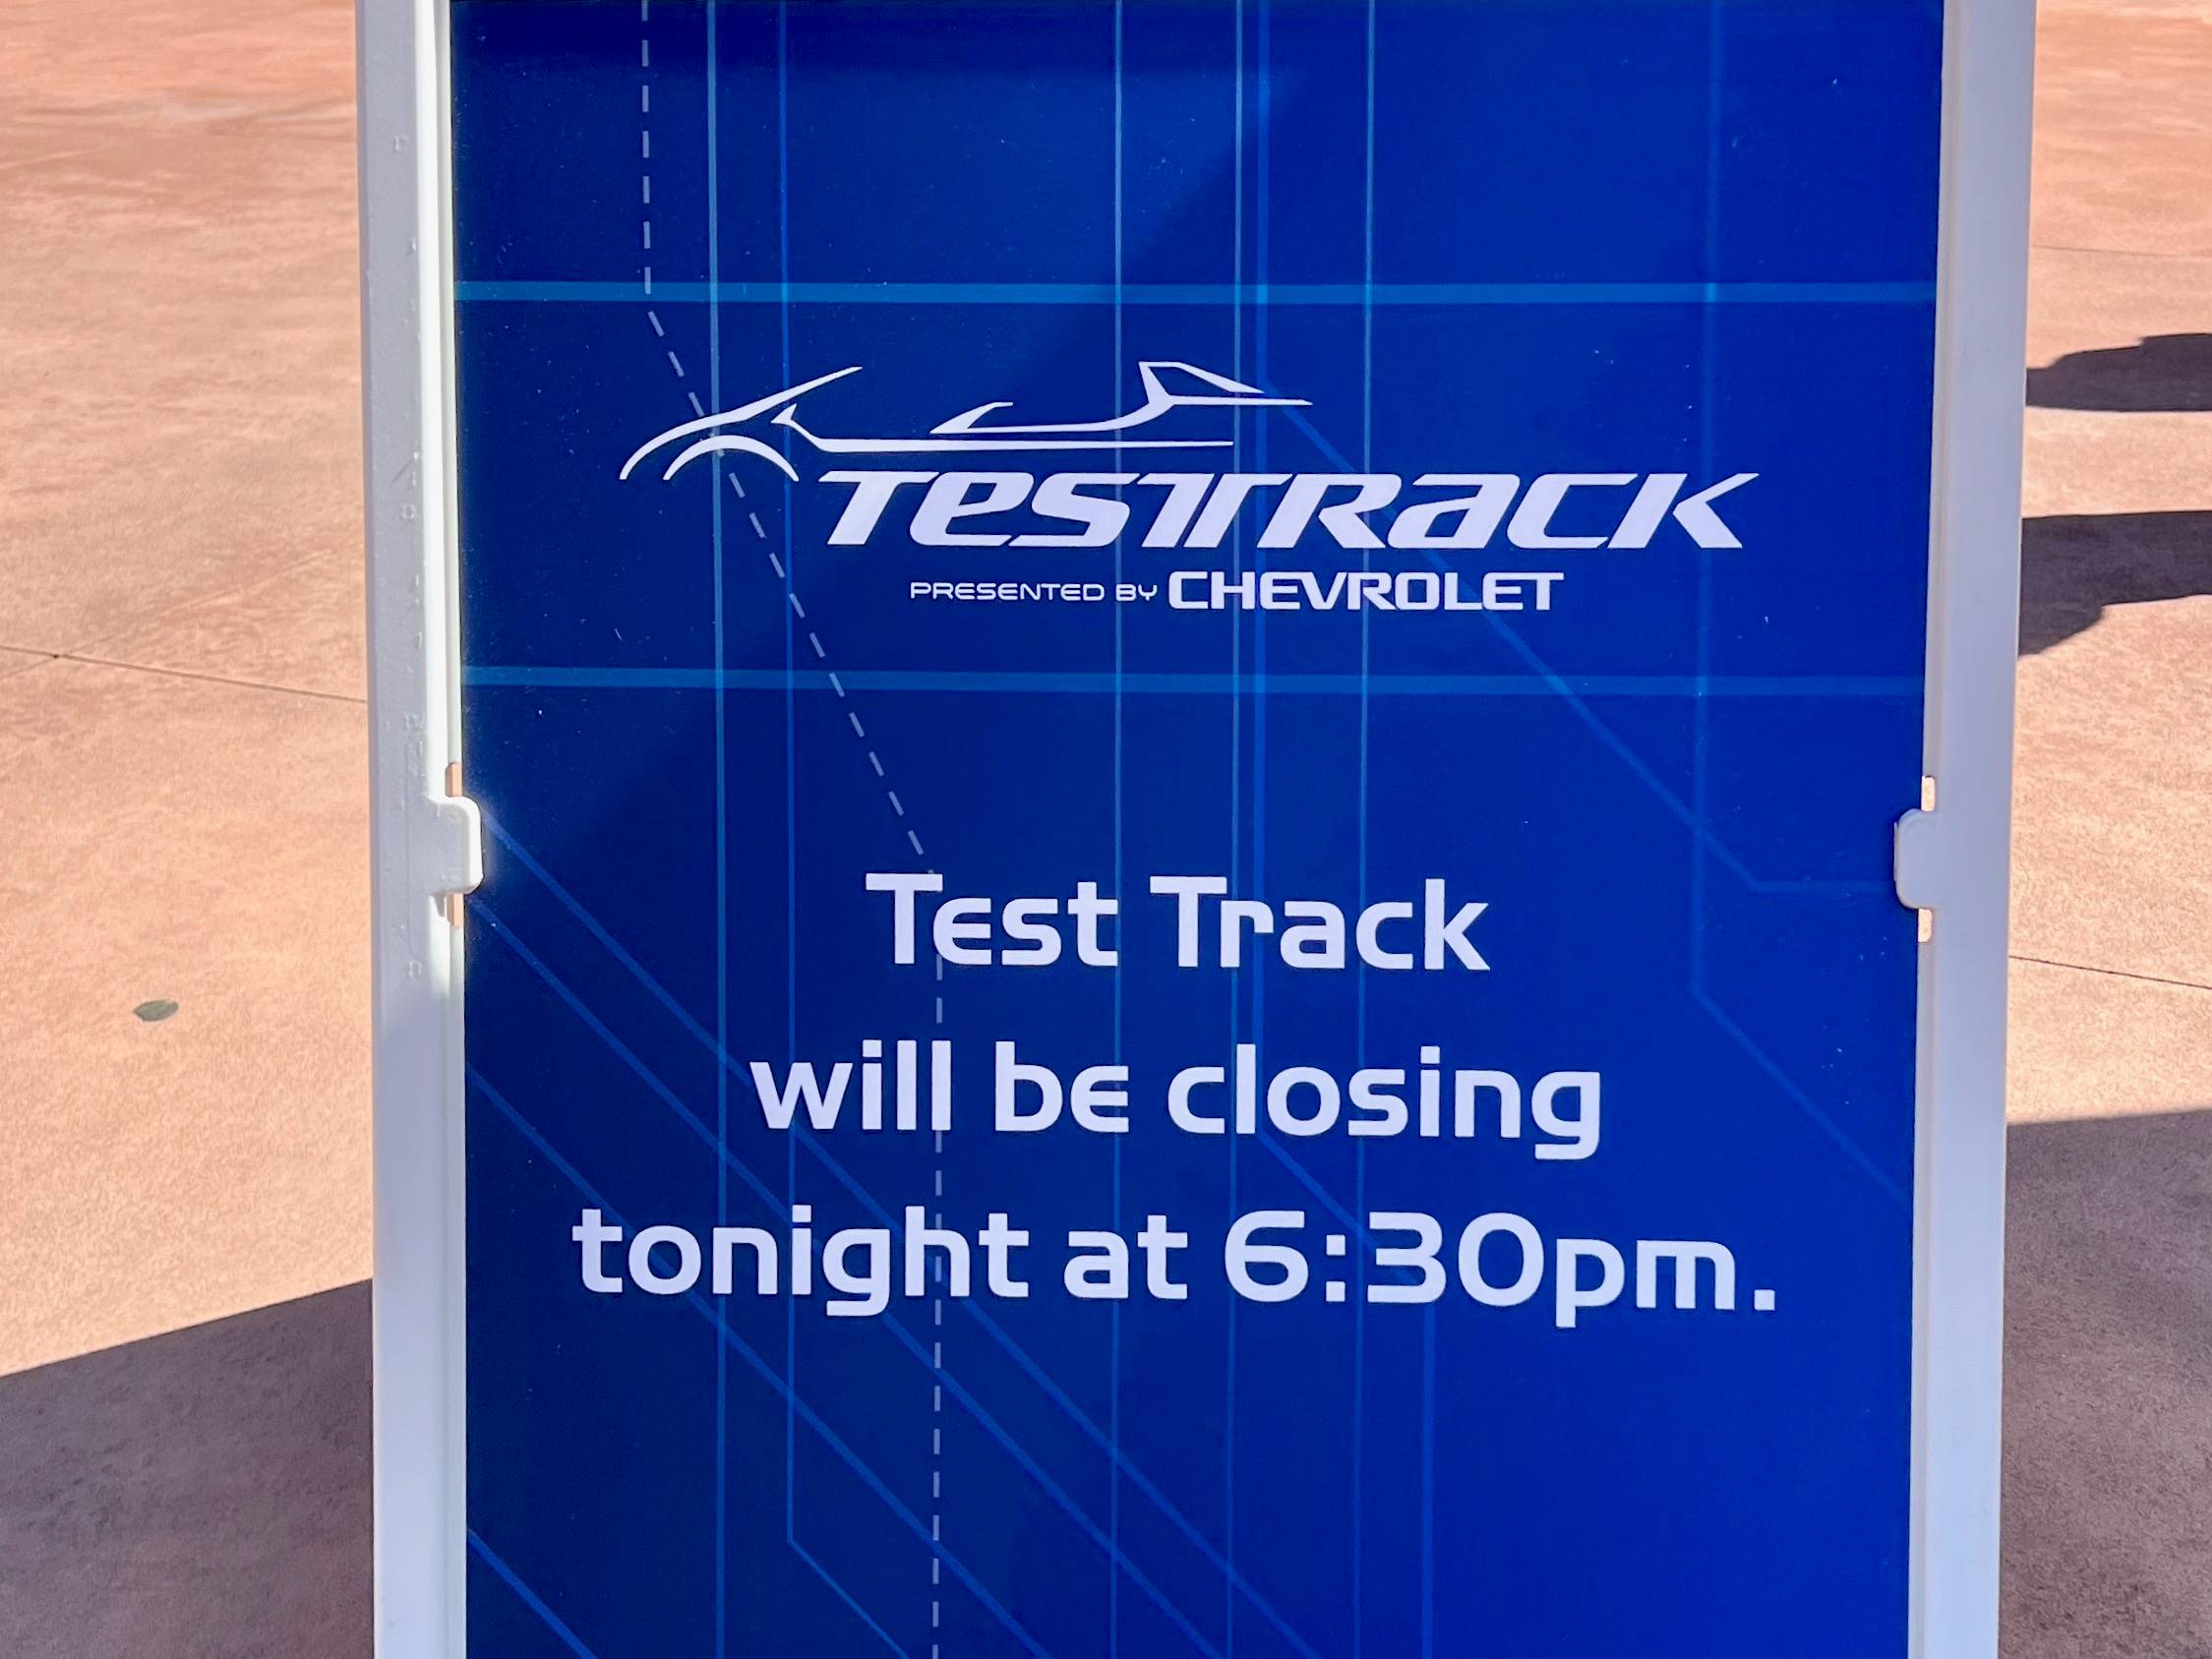 Test Track was closing at 6:30pm earlier this week